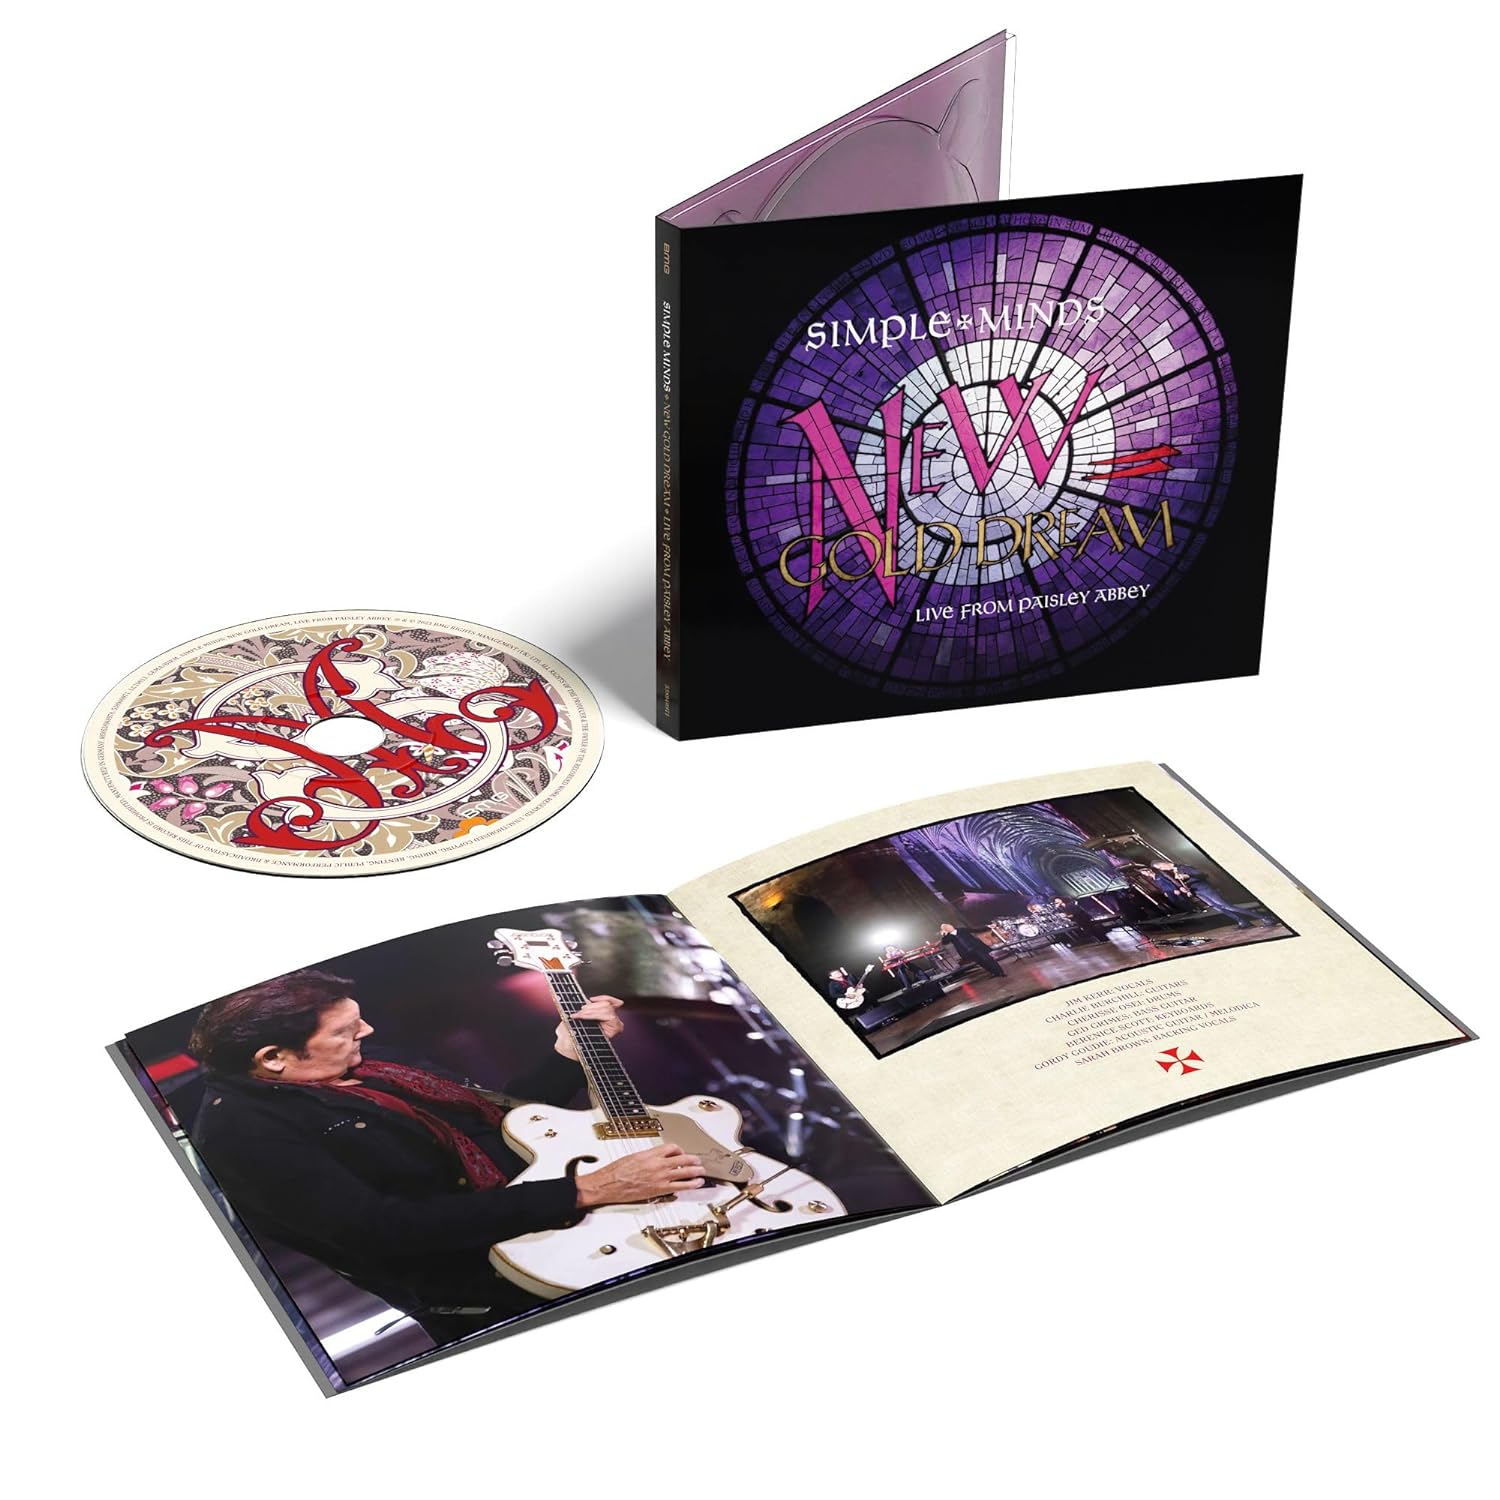 Simple Minds – New Gold Dream (Live From Paisley Abbey) CD